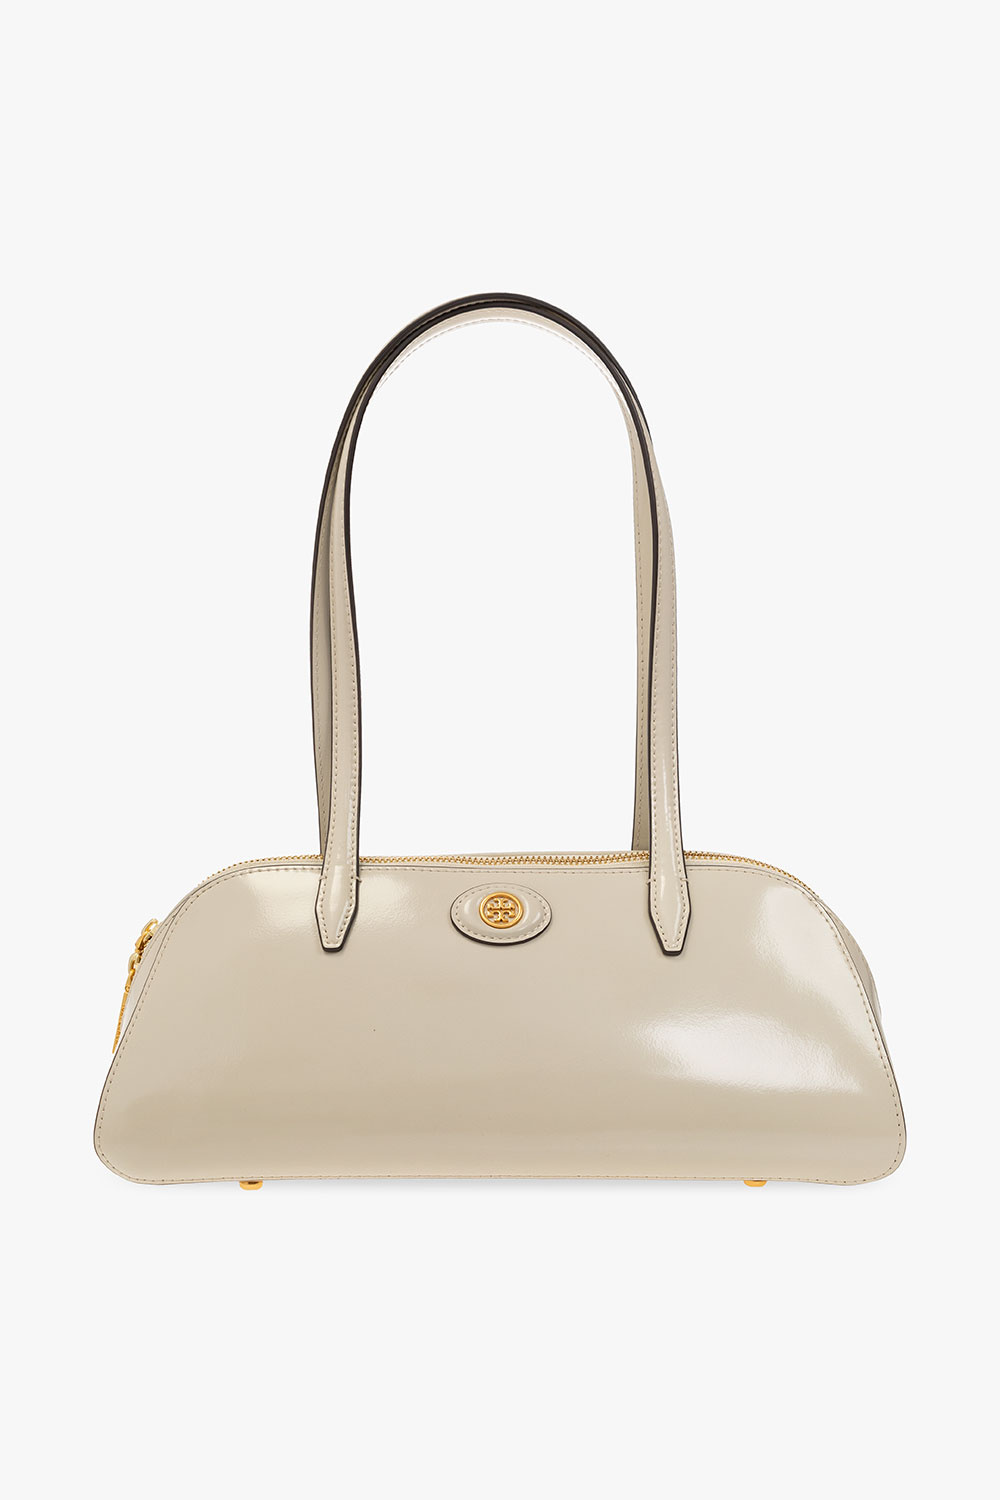 Tory Burch Robinson Leather Tote In New Cream/gold